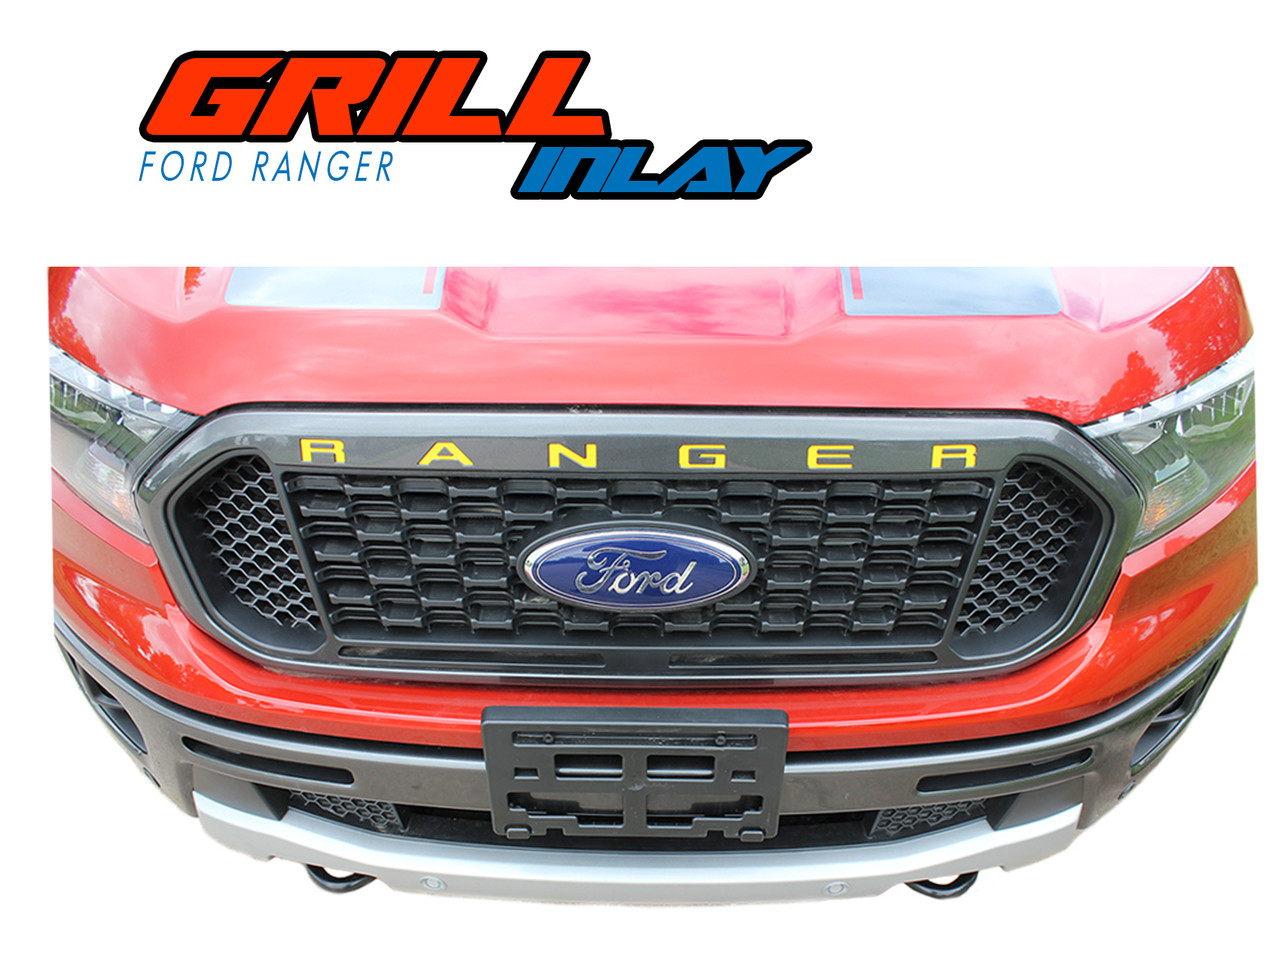 GRILL TEXT | Ford Ranger Stripes | Ford Ranger Decals | Ranger Graphics